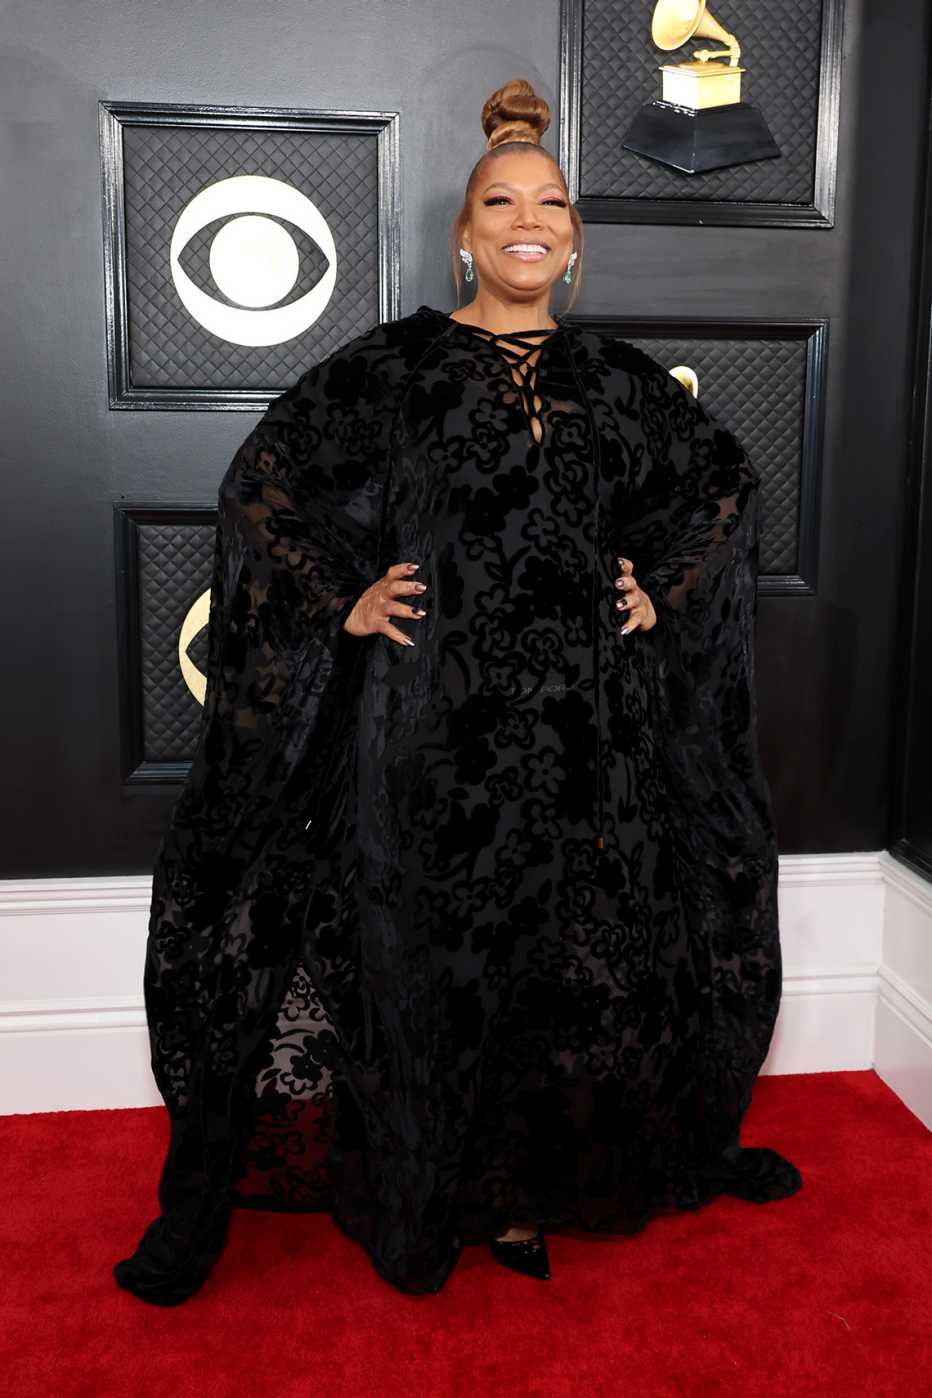 Queen Latifah on the red carpet at the 65th Grammy Awards